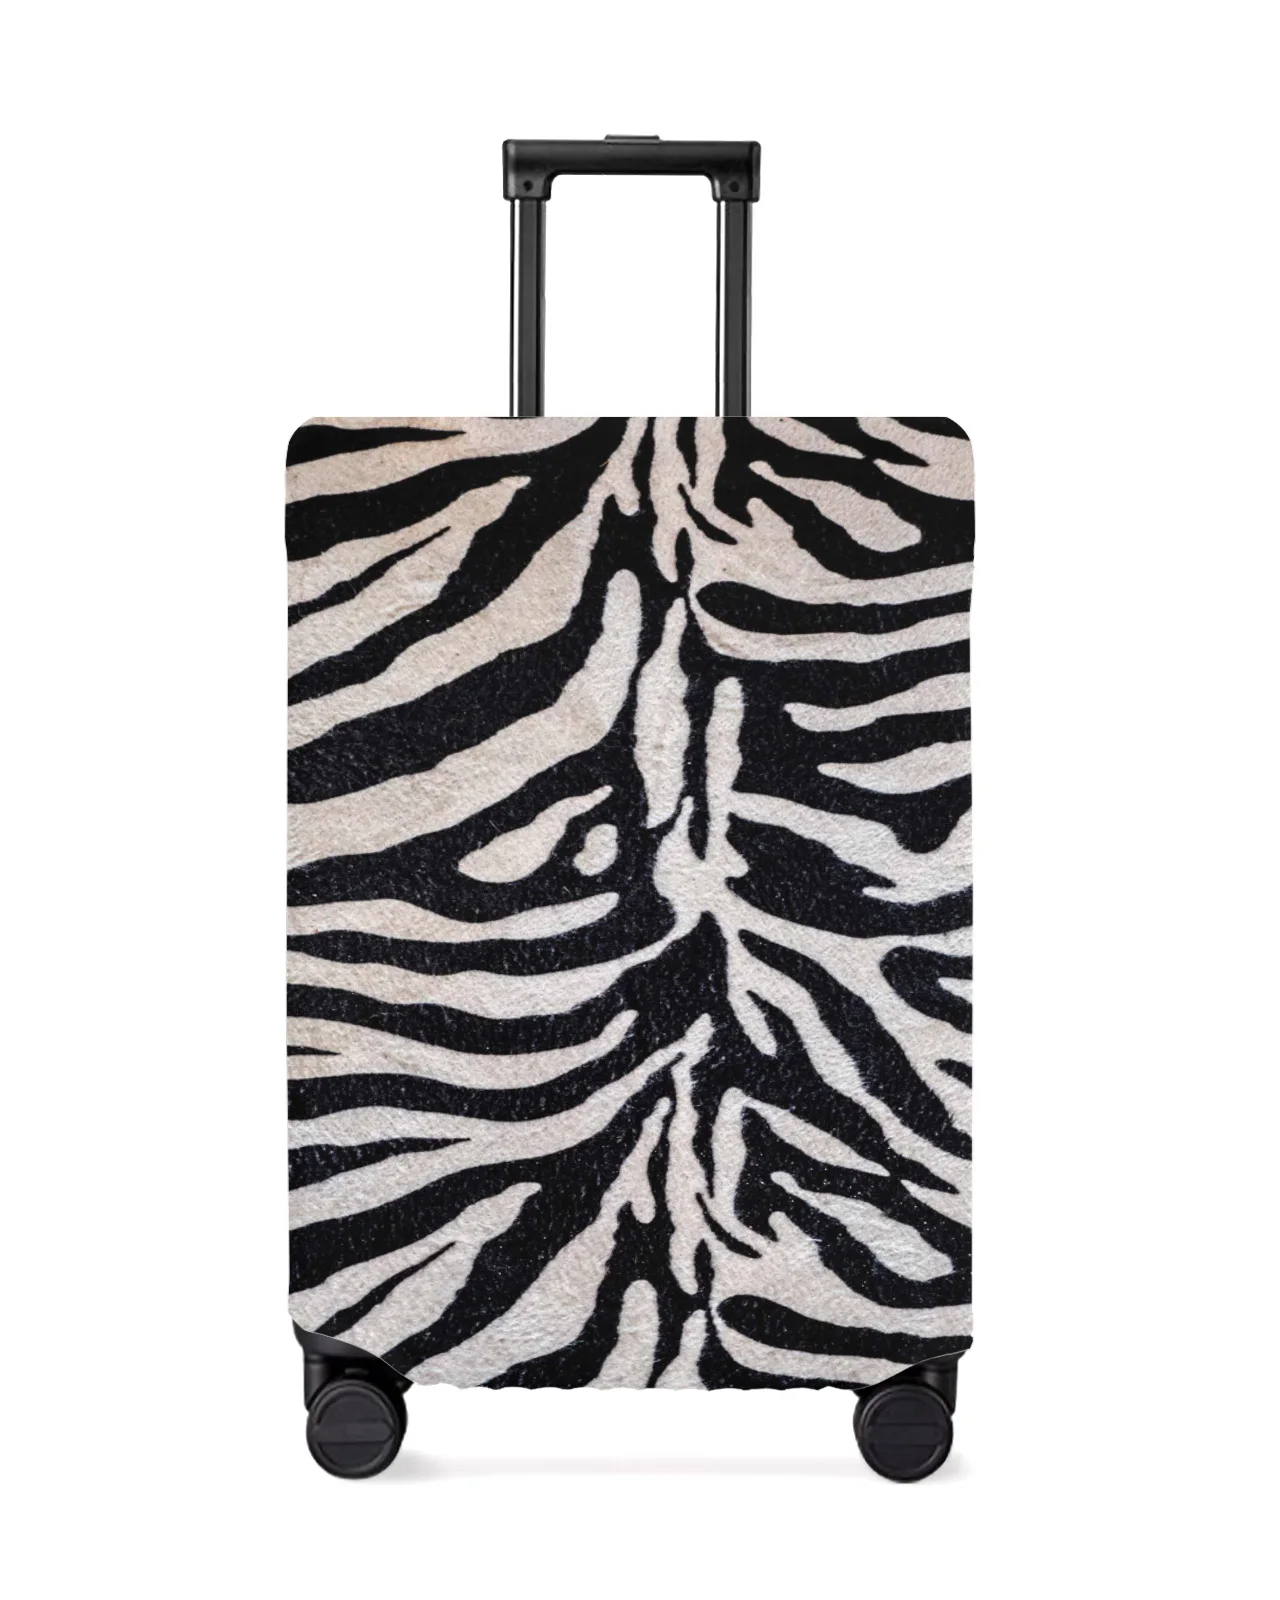 animal-zebra-fur-texture-pattern-travel-luggage-protective-cover-travel-accessories-suitcase-elastic-dust-case-protect-sleeve